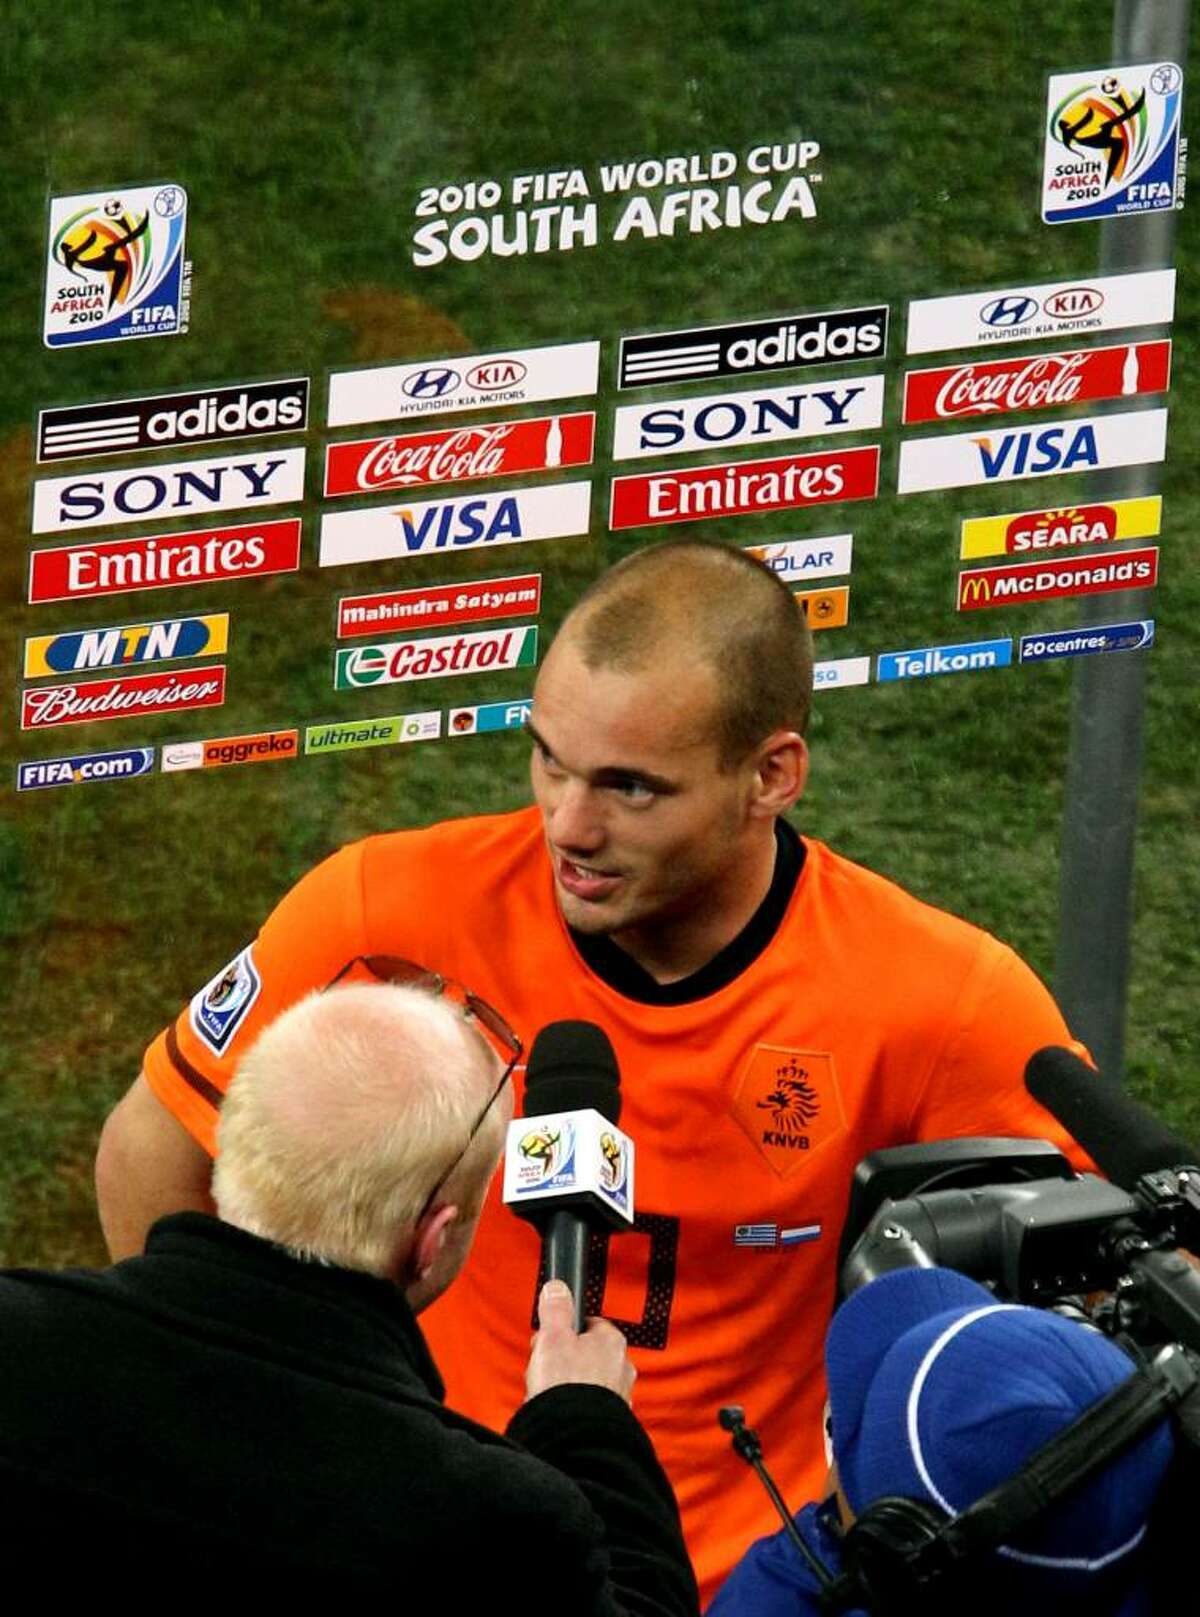 CAPE TOWN, SOUTH AFRICA - JULY 06: Man of the match Wesley Sneijder of the Netherlands is interviewed following the 2010 FIFA World Cup South Africa Semi Final match between Uruguay and the Netherlands at Green Point Stadium on July 6, 2010 in Cape Town, South Africa. (Photo by Richard Heathcote/Getty Images) *** Local Caption *** Wesley Sneijder